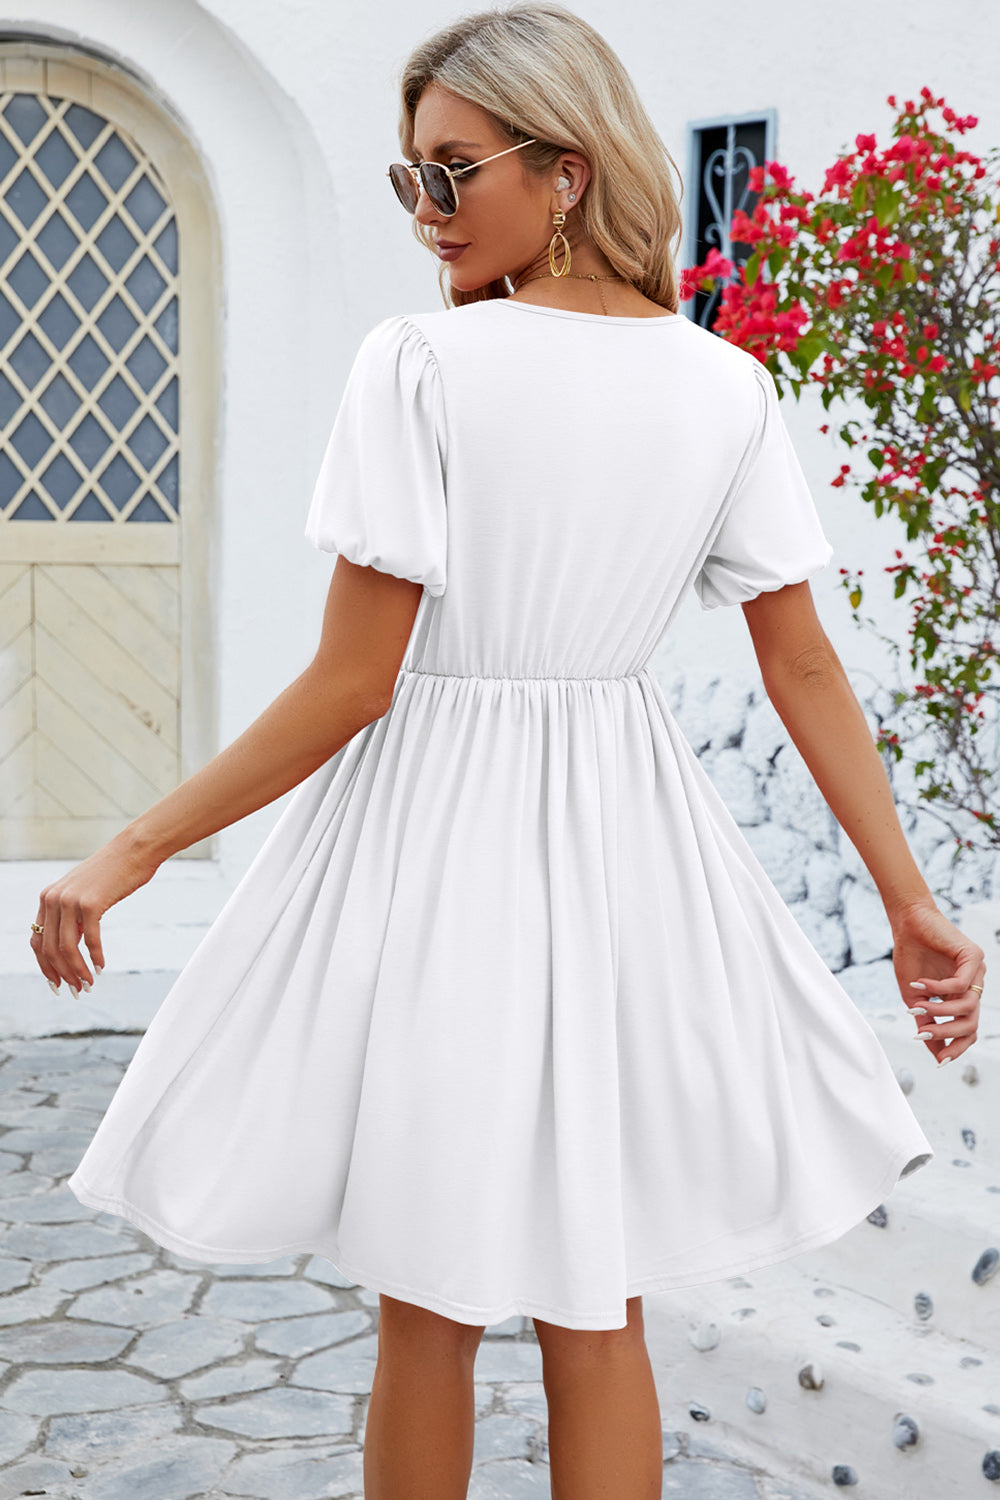 White V-neck dress with puff sleeves and a flared skirt.